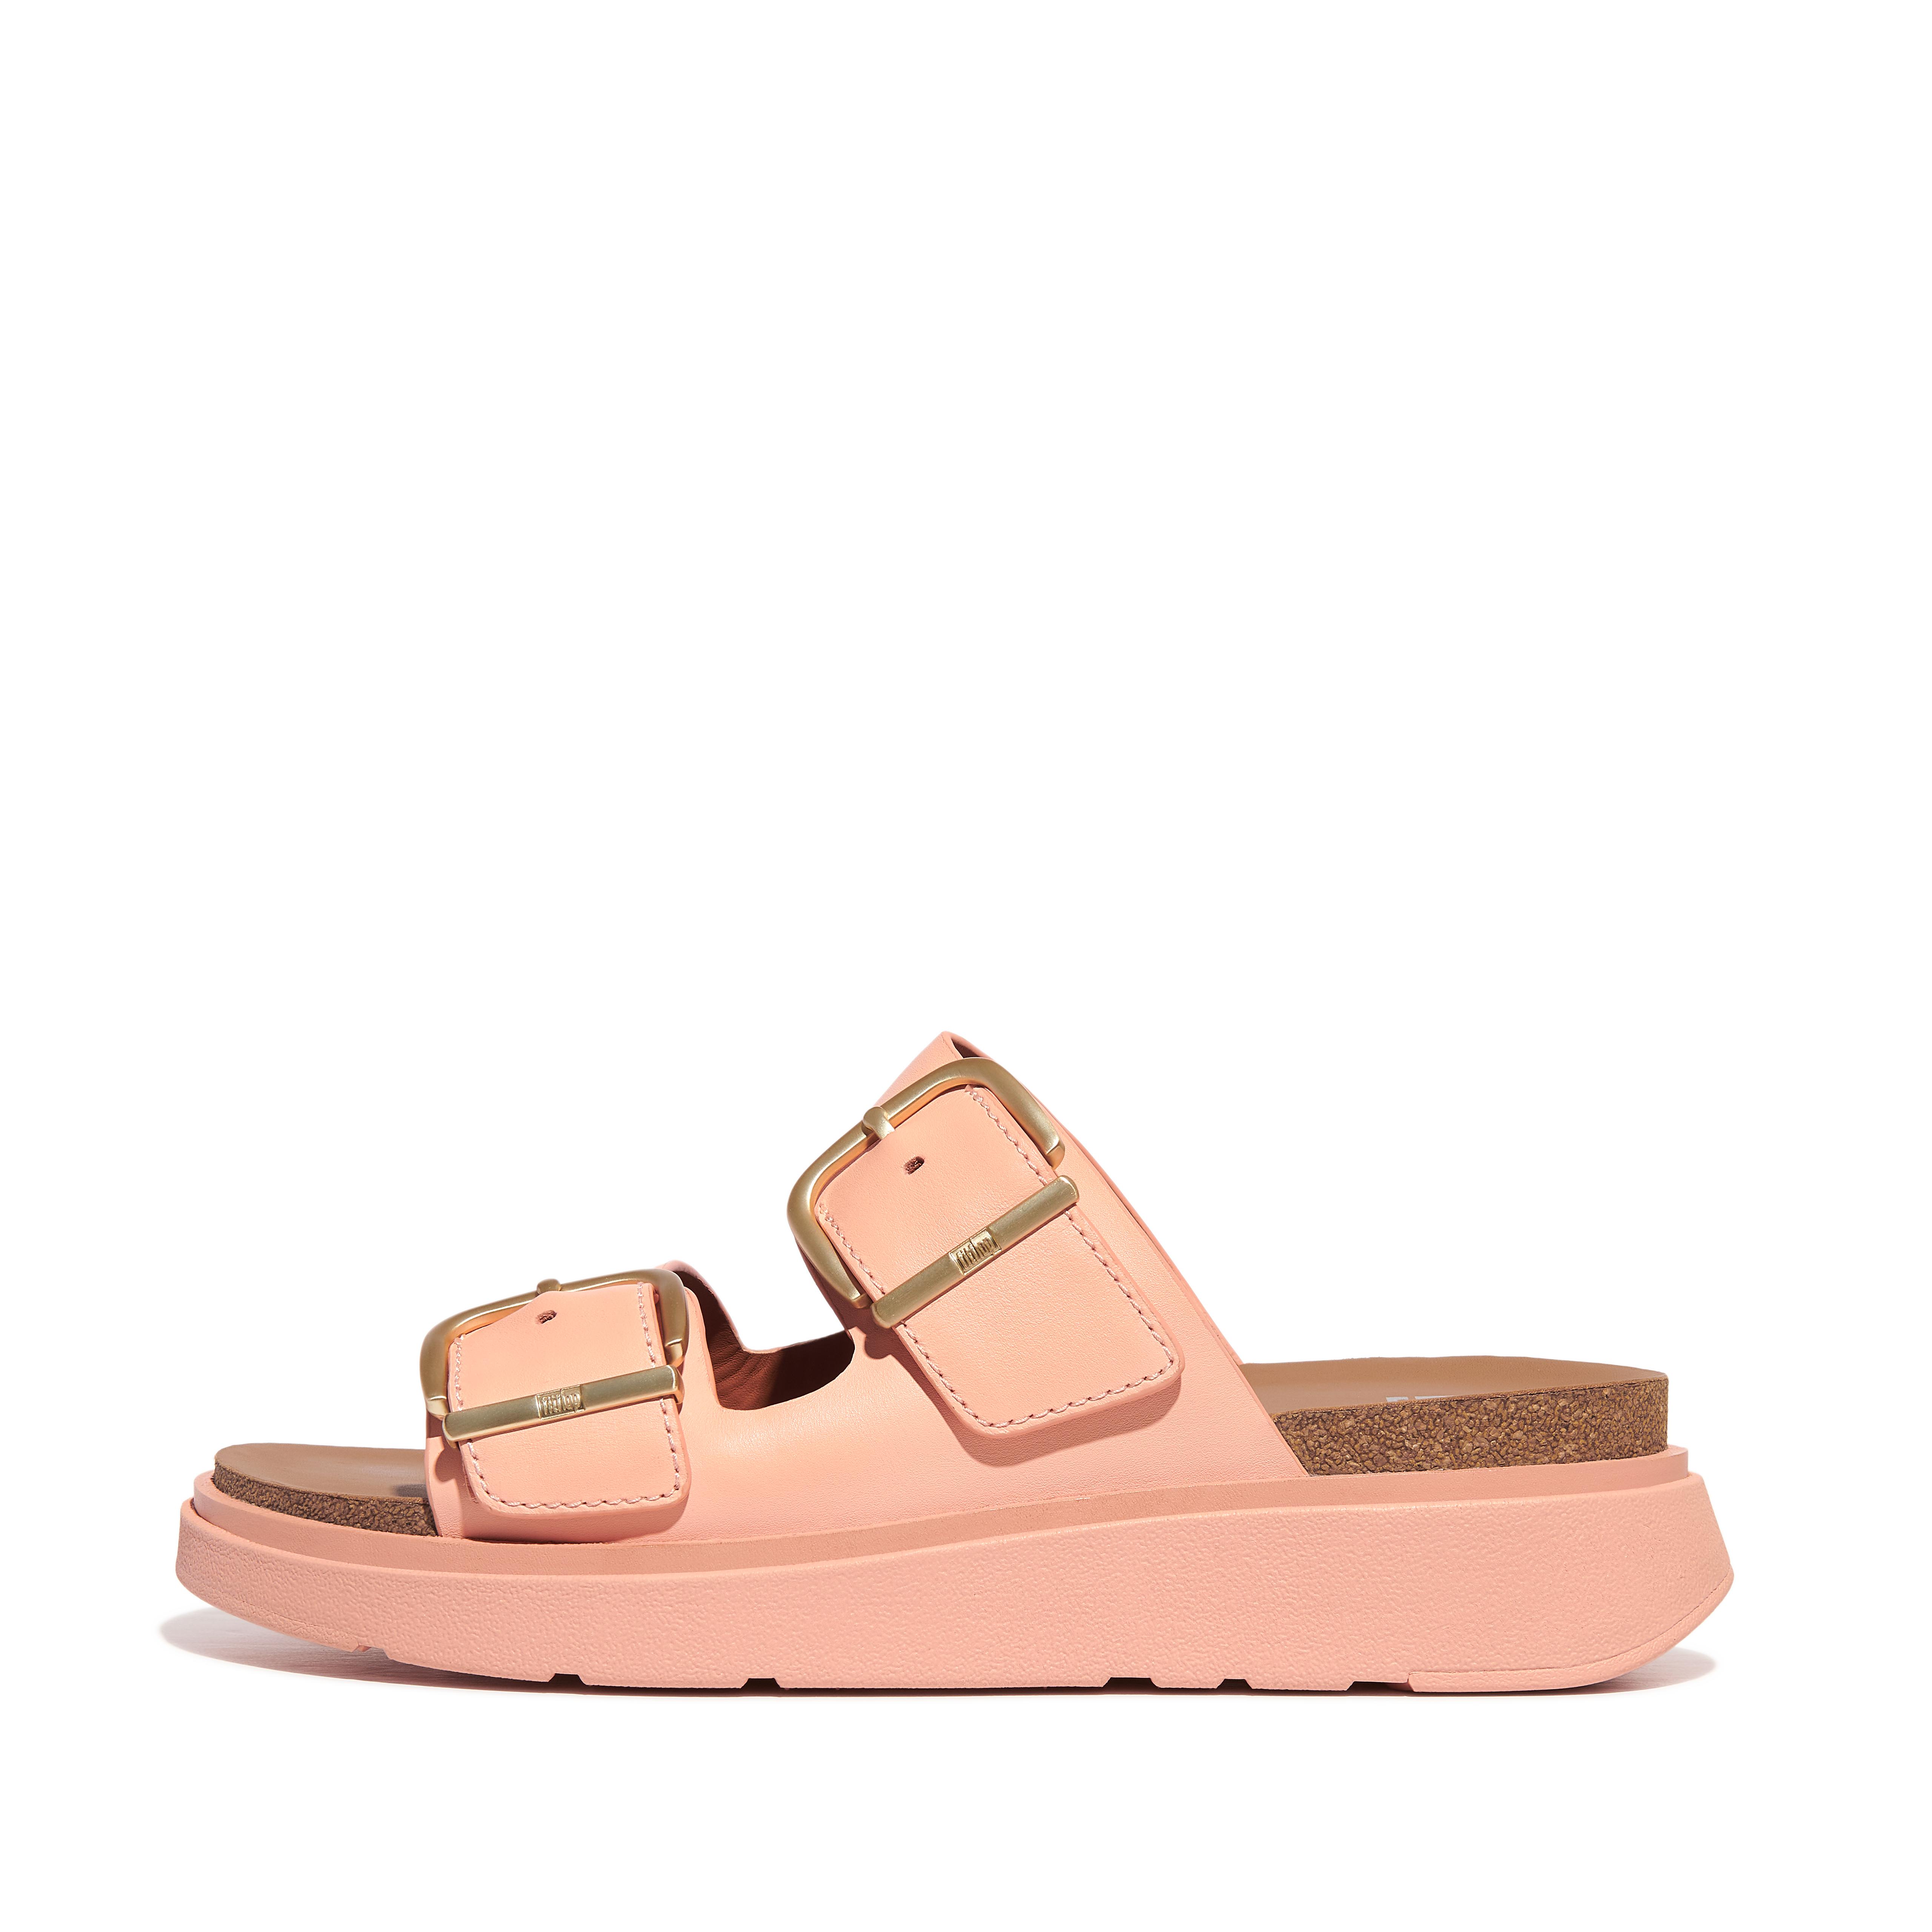 Fitflop Buckle Two-Bar Leather Slides,Blushy